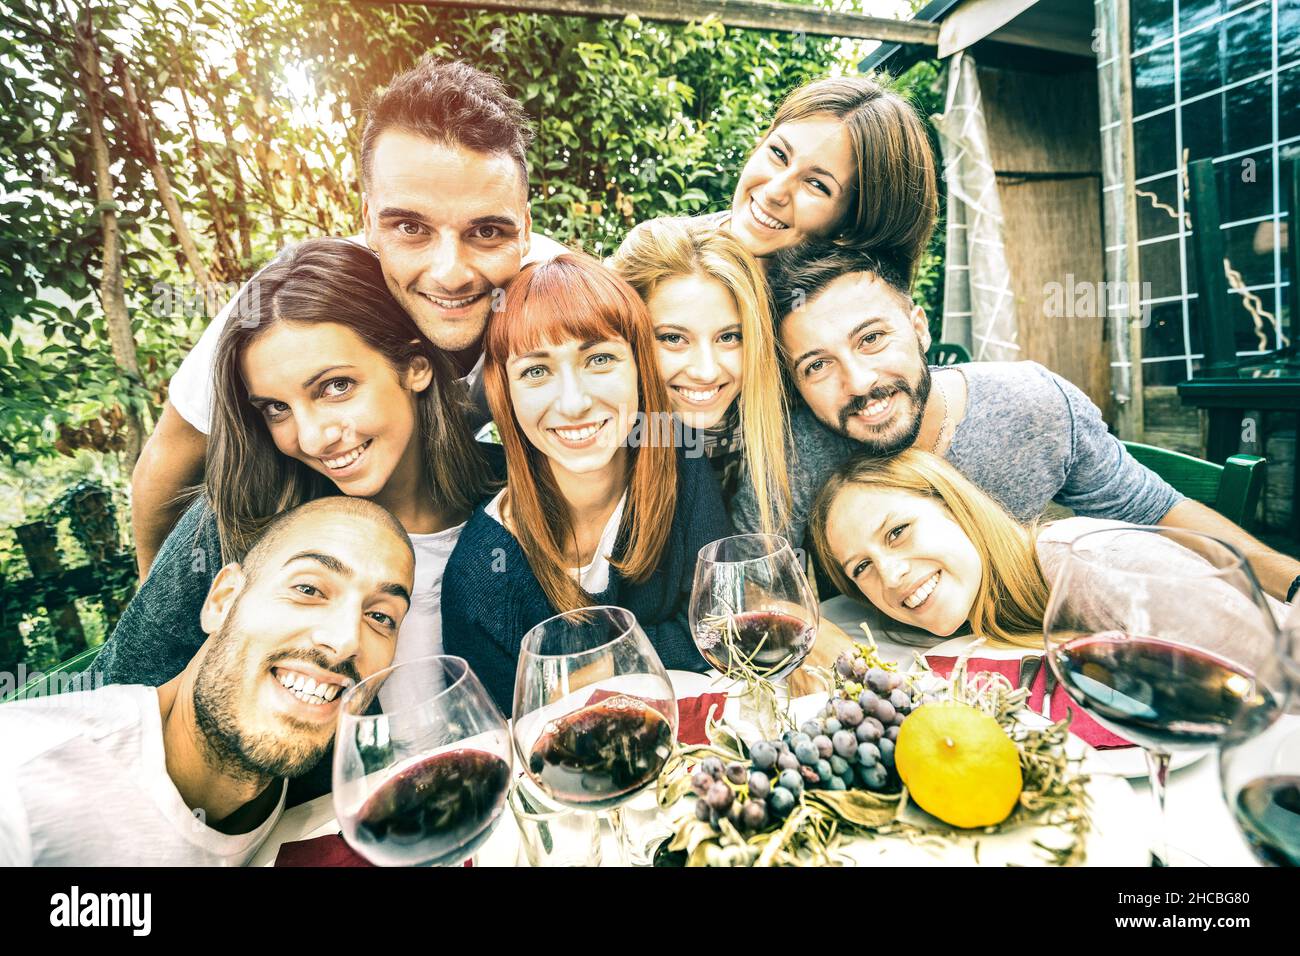 Best friends taking selfie at lunch party with serene faces - Happy youth concept with young people having fun together drinking wine Stock Photo